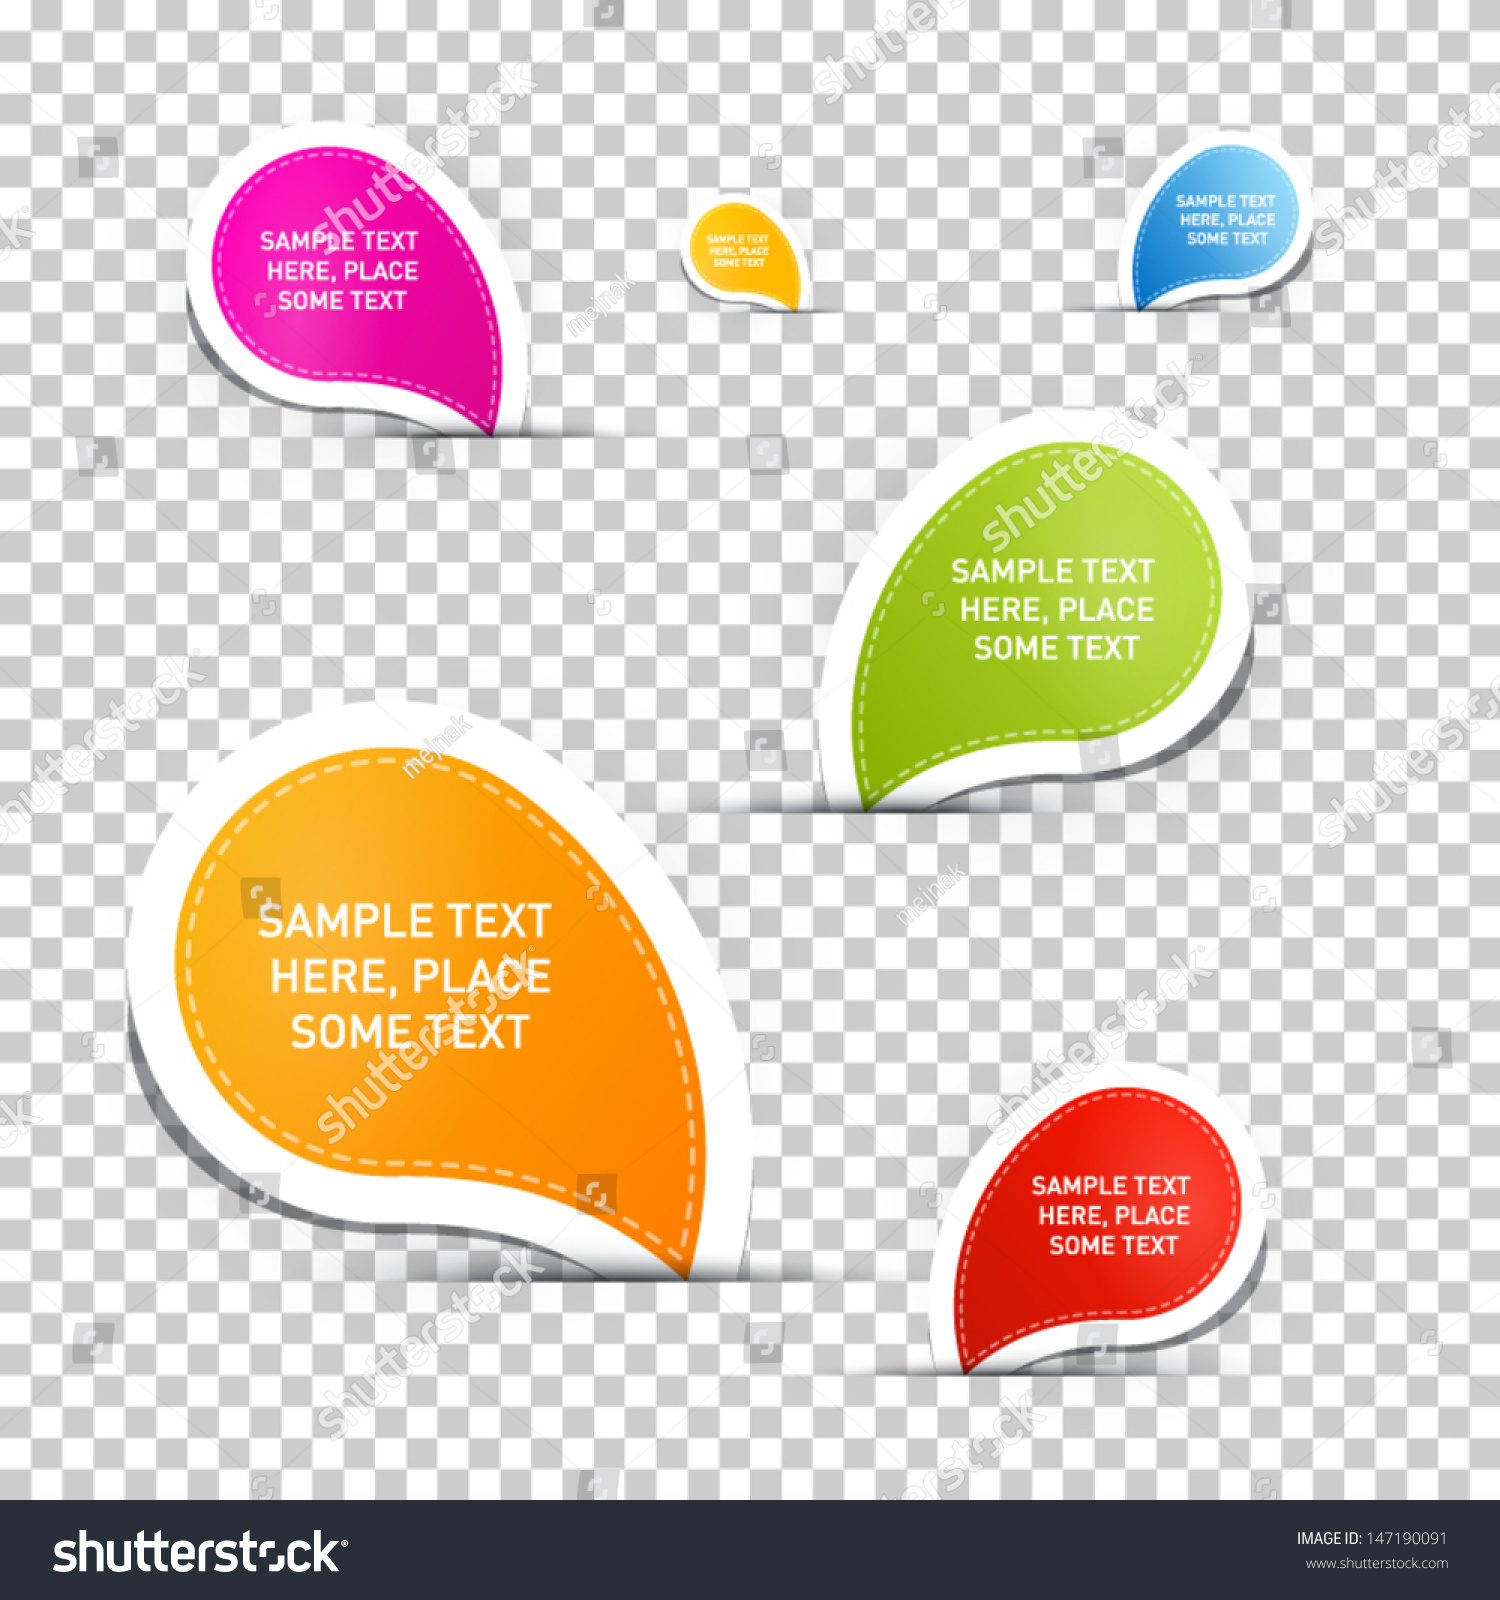 Colorful Vector Stickers On Transparent Background - 147190091